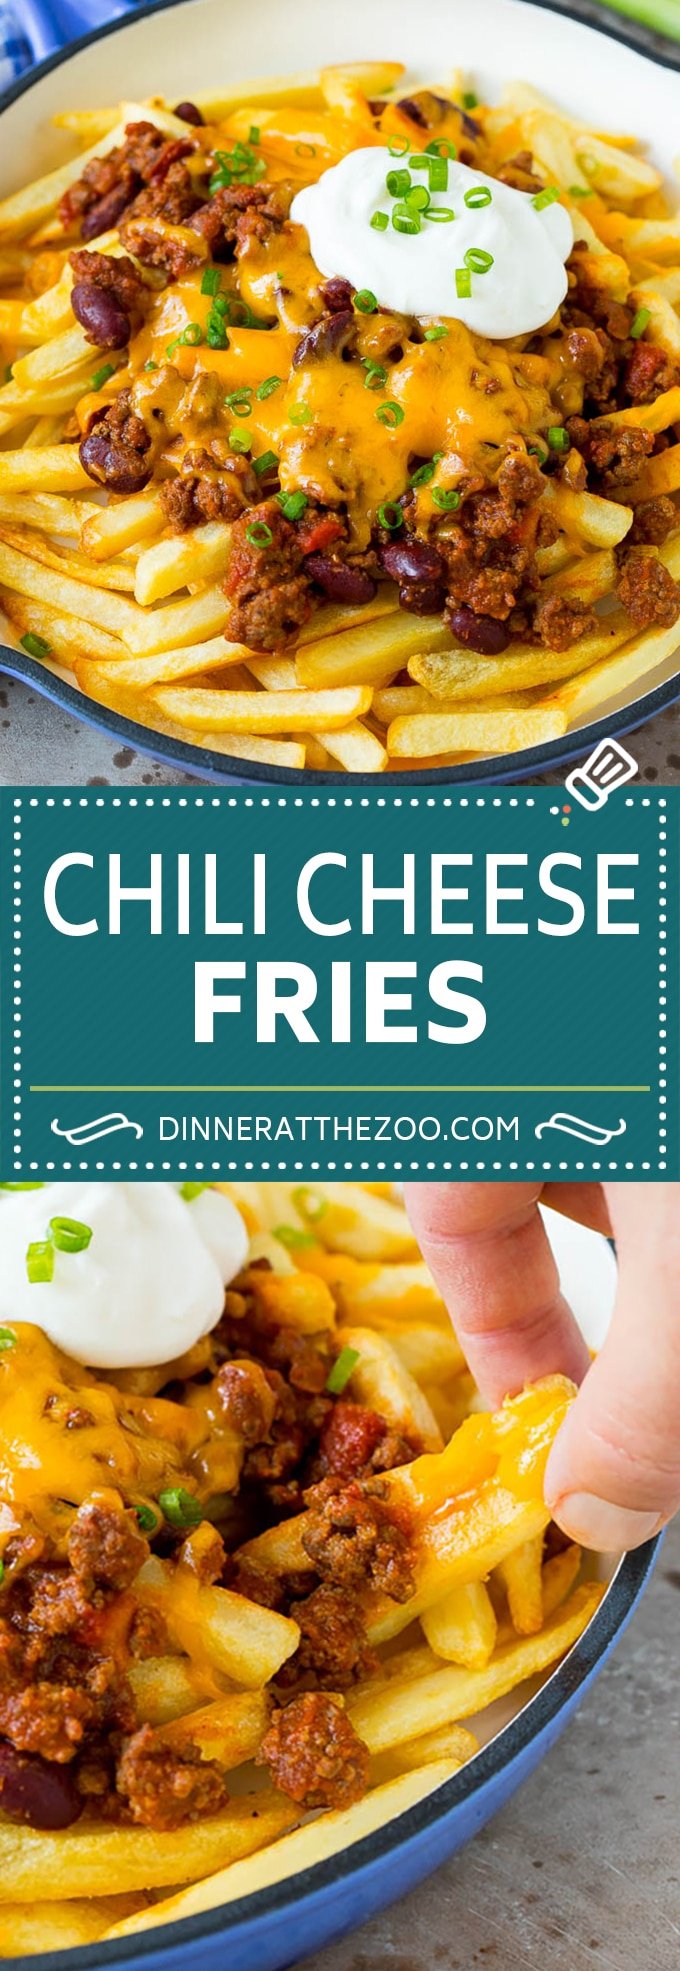 These chili cheese fries are crispy french fries topped with homemade beef chili and cheese cheese, then baked to melted perfection.